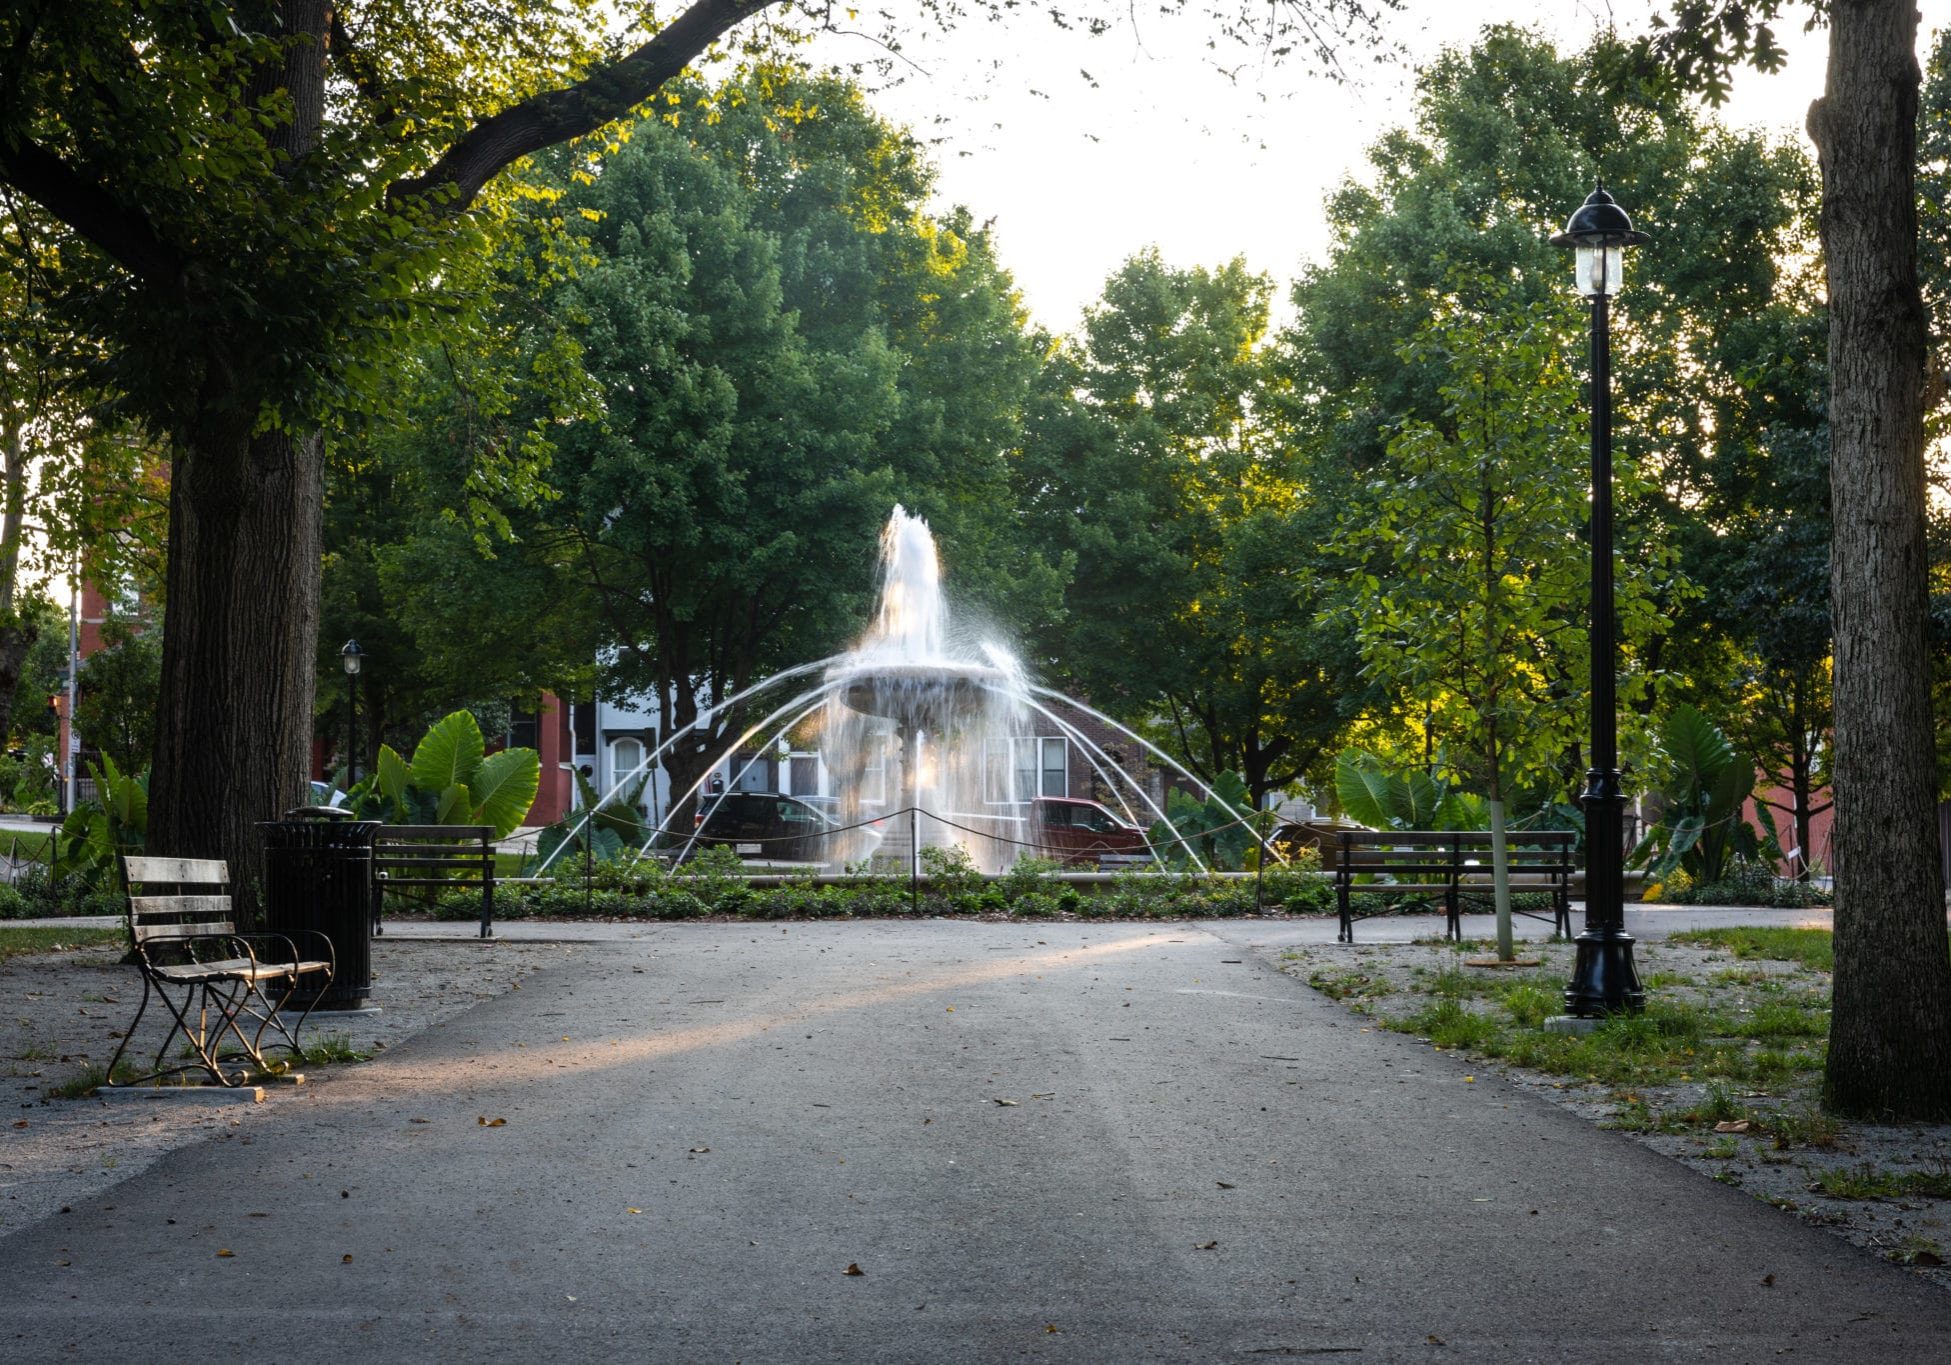 An image of a fountain in Allegheny Commons Park from a trail